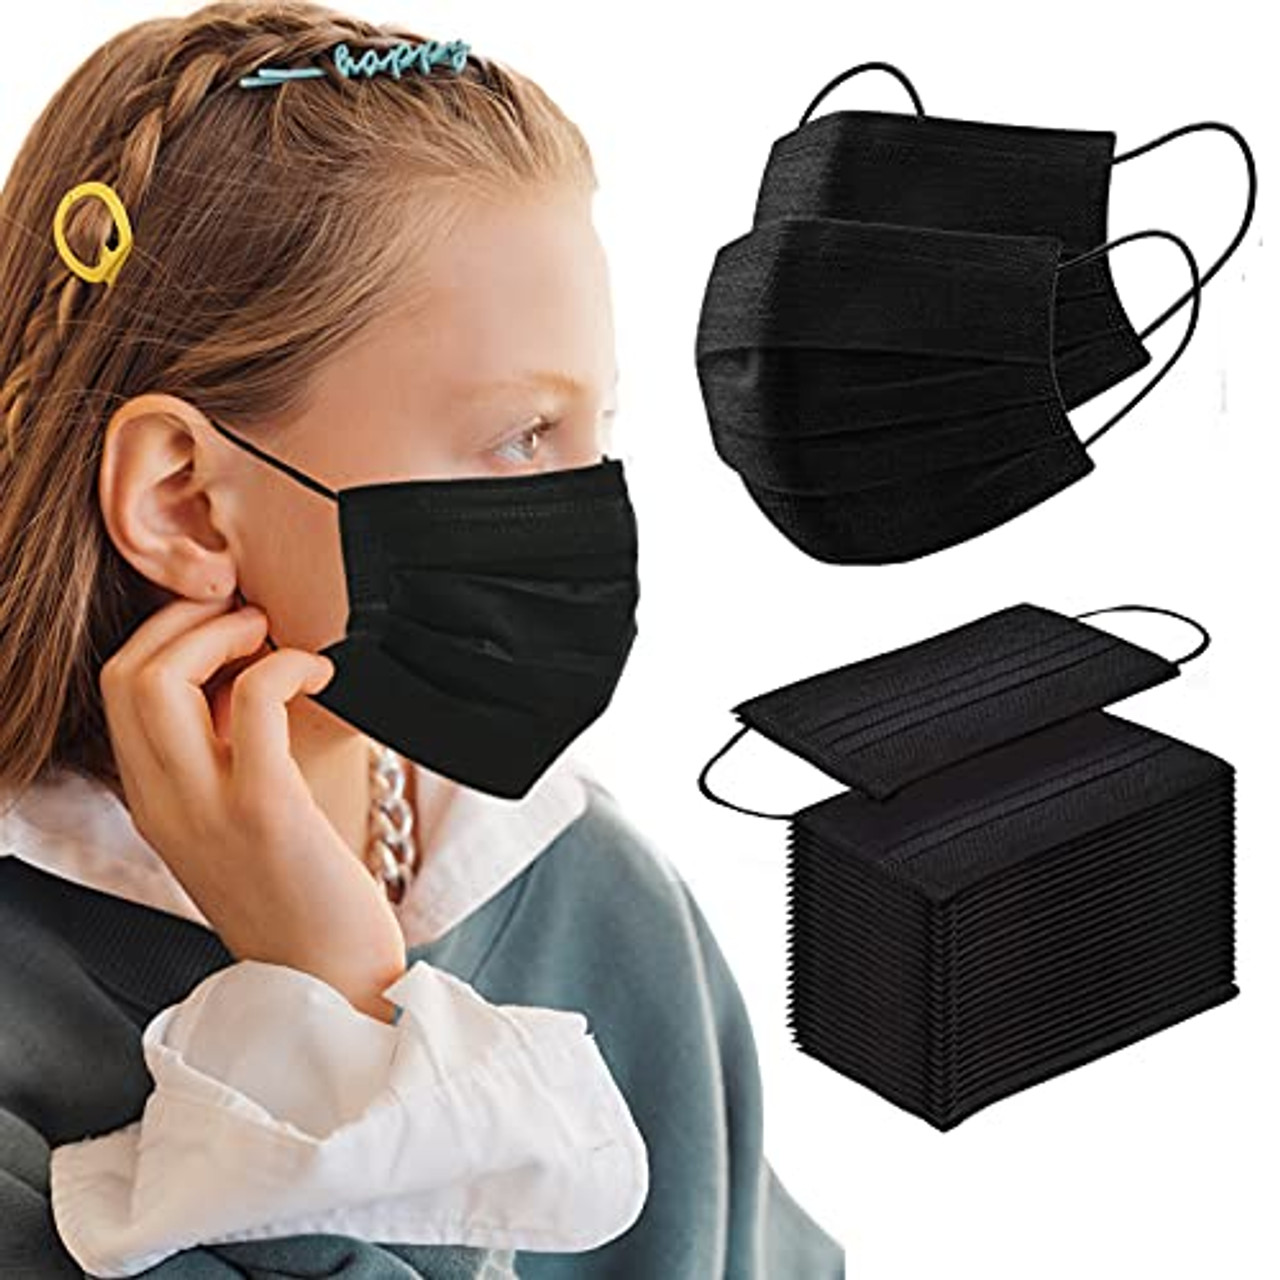 Face Mask 100PCS Adult Black Disposable Masks 3-Layer Filter Protection  Breathable Dust Masks with Elastic Ear Loop for Men Women